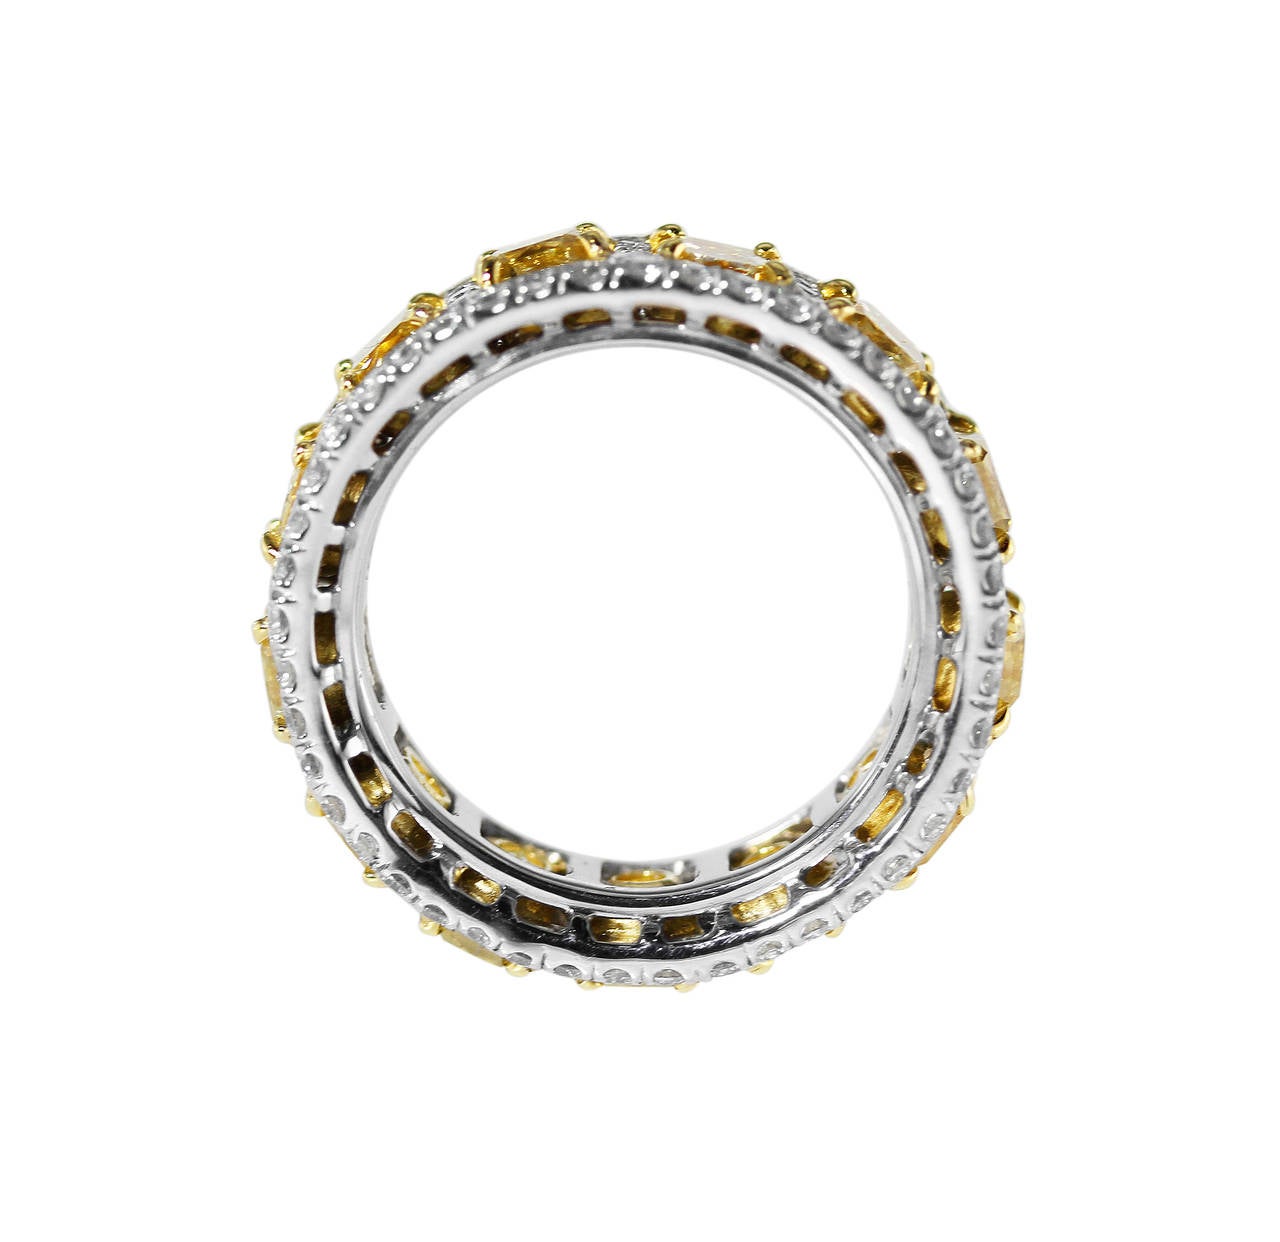 A platinum, 18 karat yellow gold, yellow diamond and near colorless diamond band ring, set throughout with 13 radiant-cut diamonds stated to weigh 7.51 carats of fancy yellow to fancy intense yellow color, accented by 125 small near colorless round